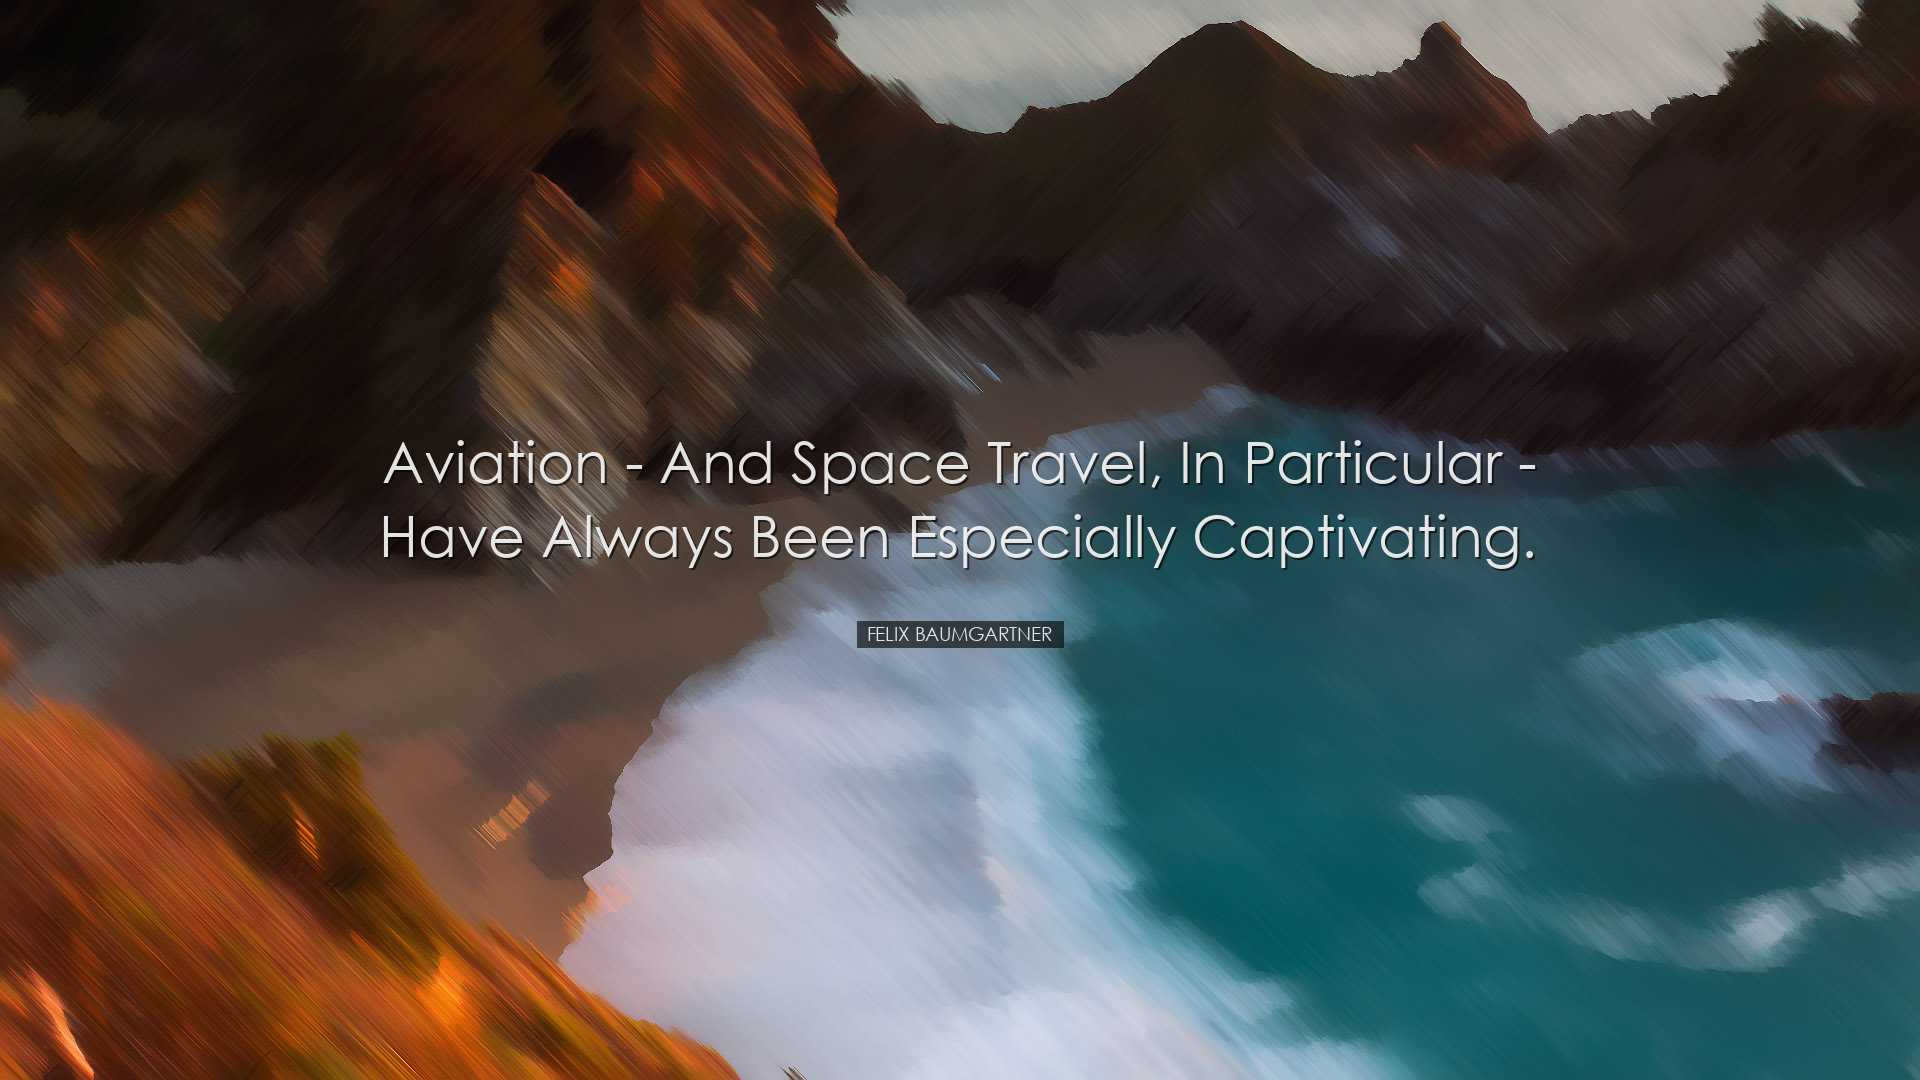 Aviation - and space travel, in particular - have always been espe